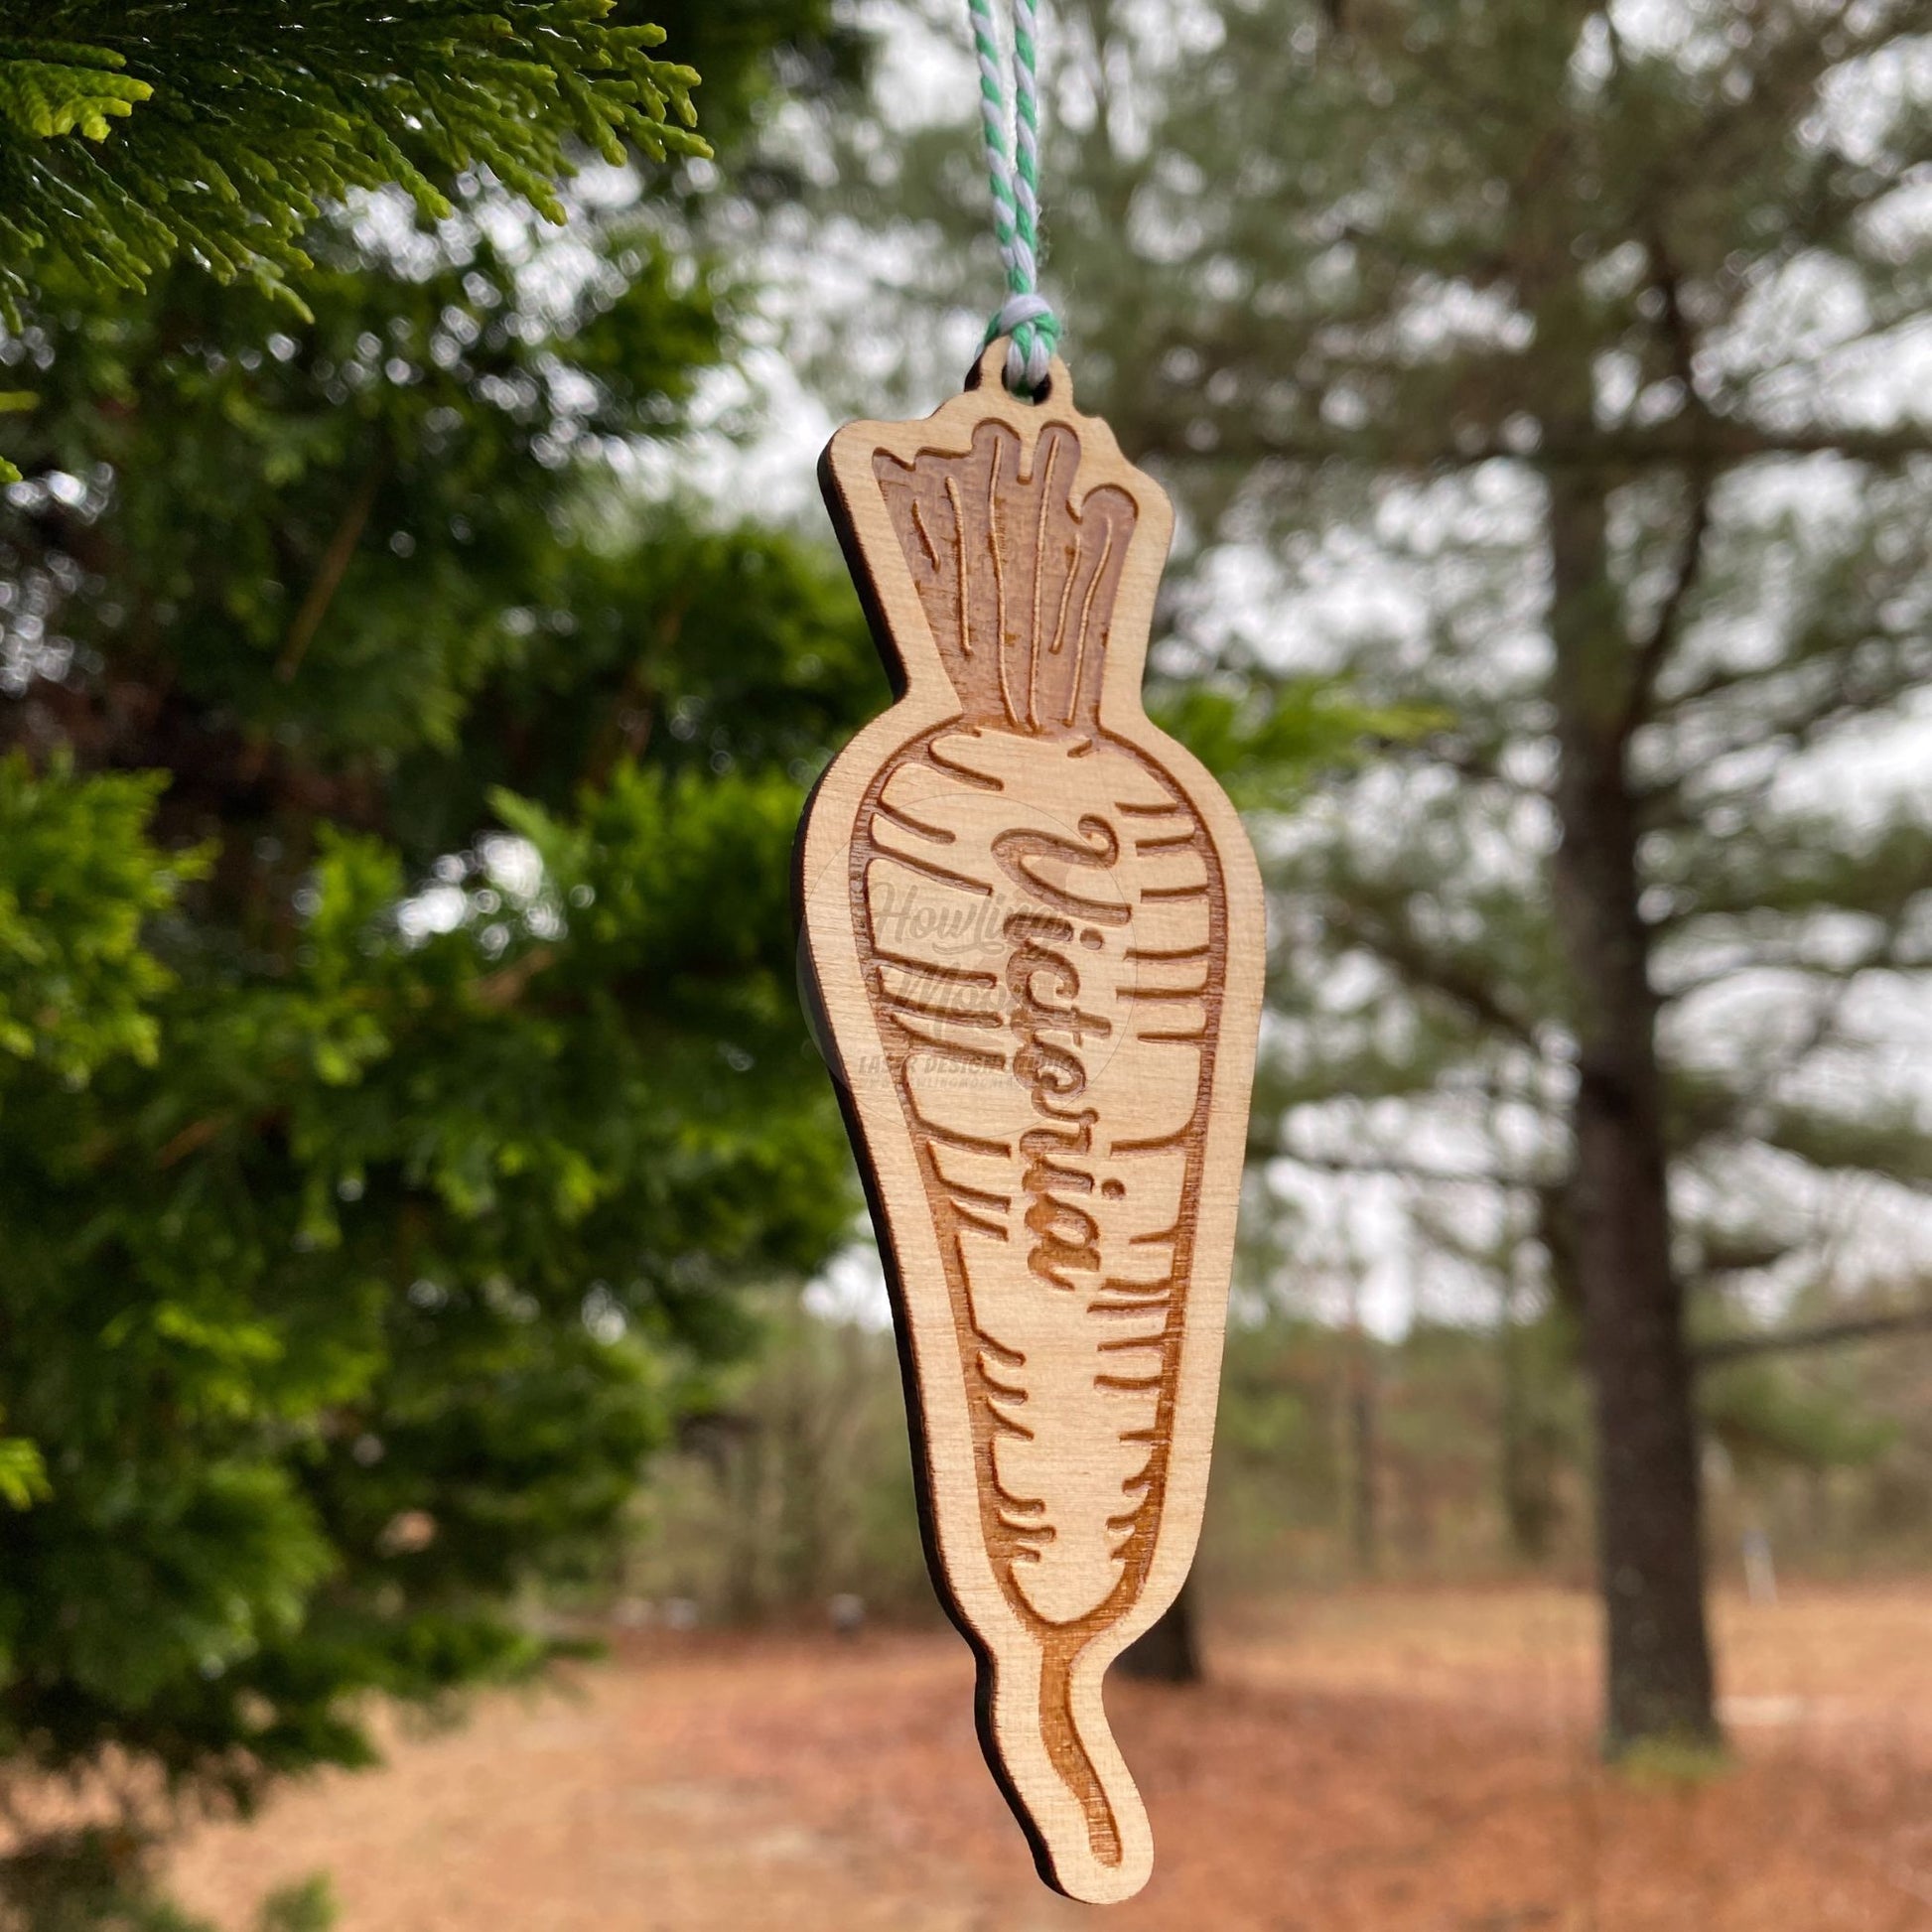 Personalized carrot ornament from Howling Moon Laser Design in Virginia USA.